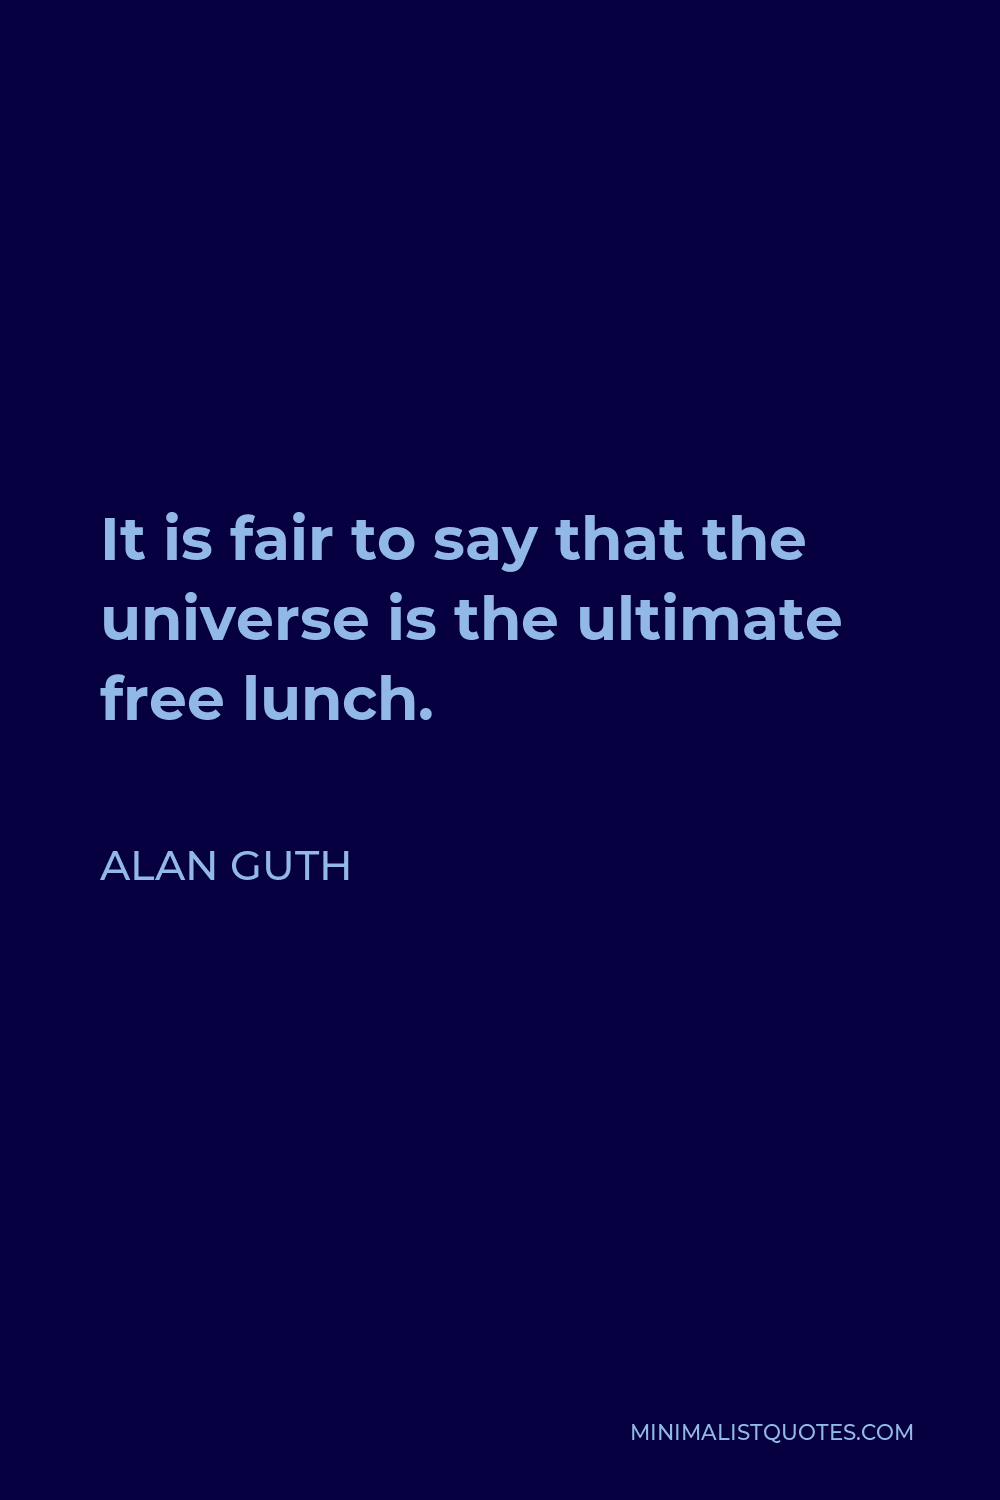 Alan Guth Quote - It is fair to say that the universe is the ultimate free lunch.